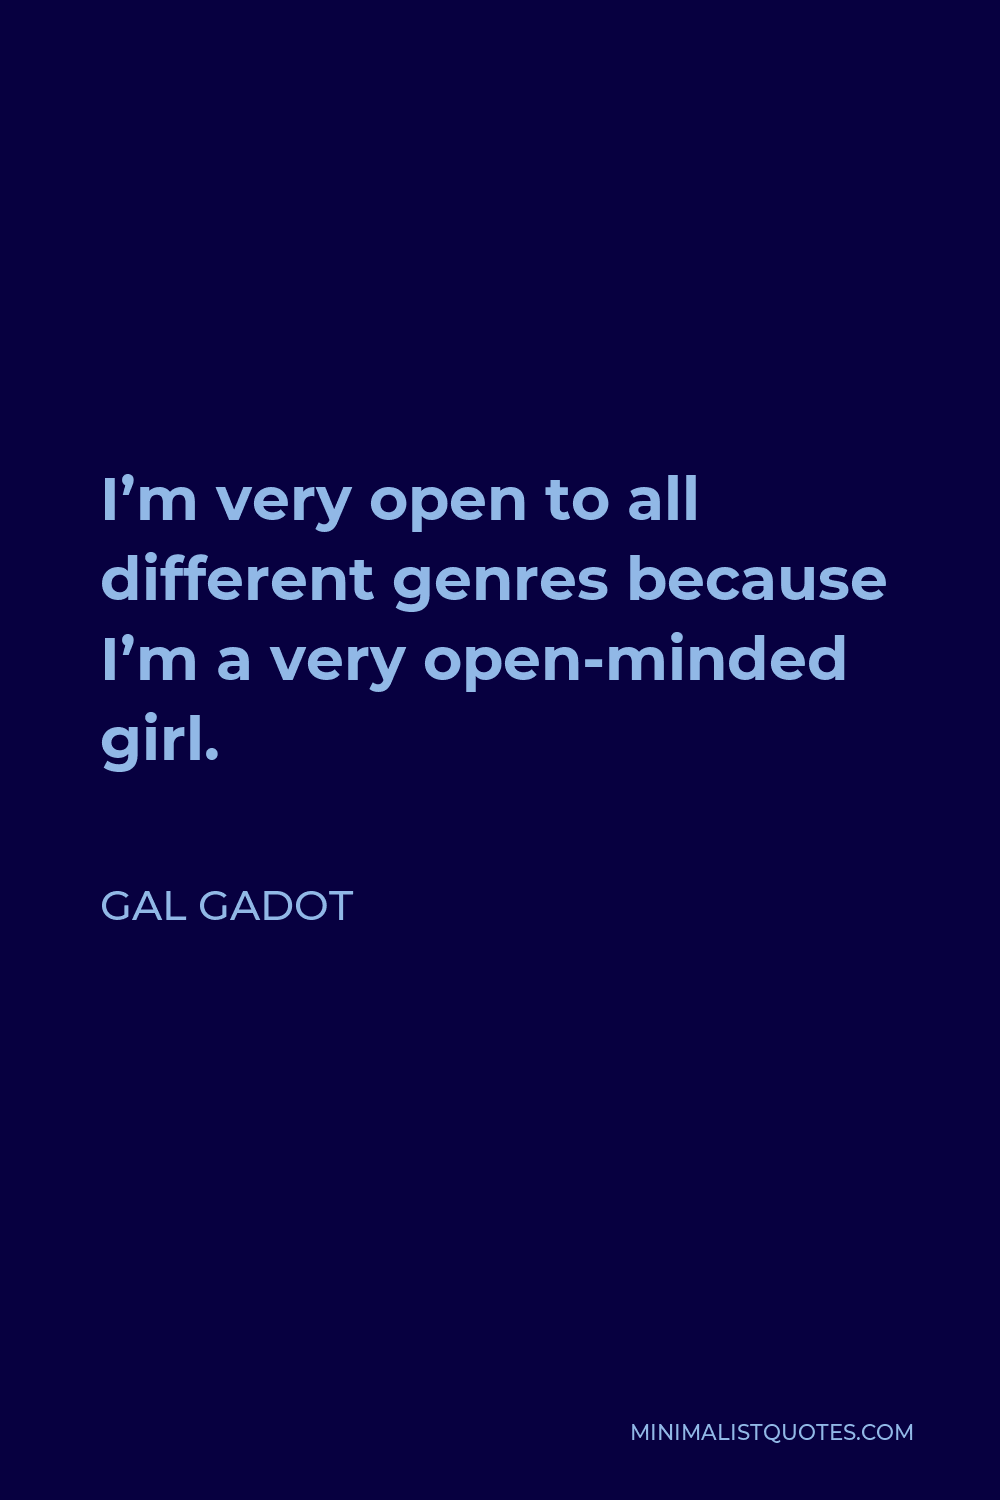 Gal Gadot Quote - I’m very open to all different genres because I’m a very open-minded girl.